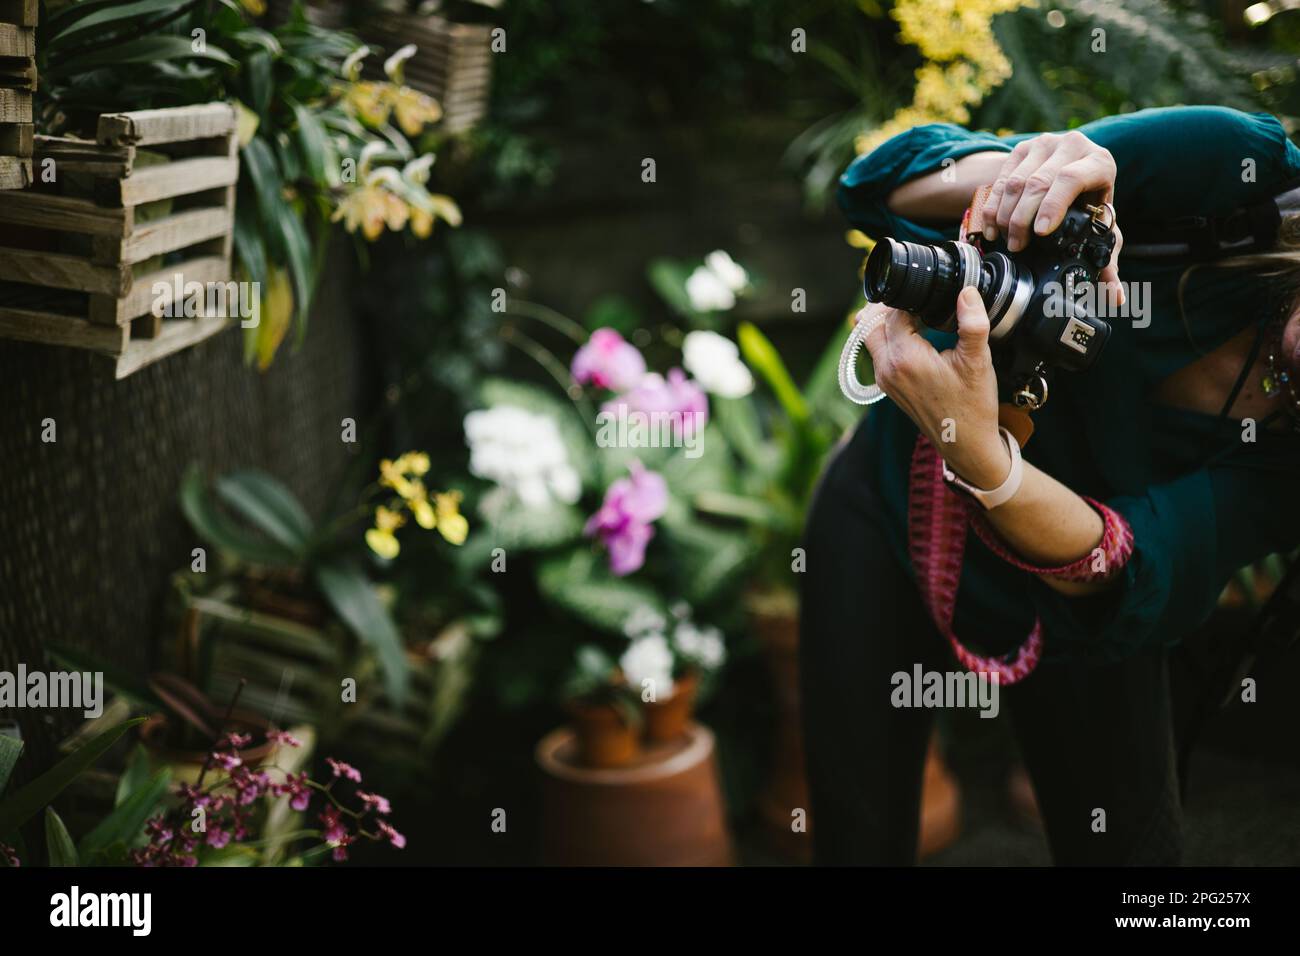 Woman photographs flowers in garden with DSLR camera Stock Photo